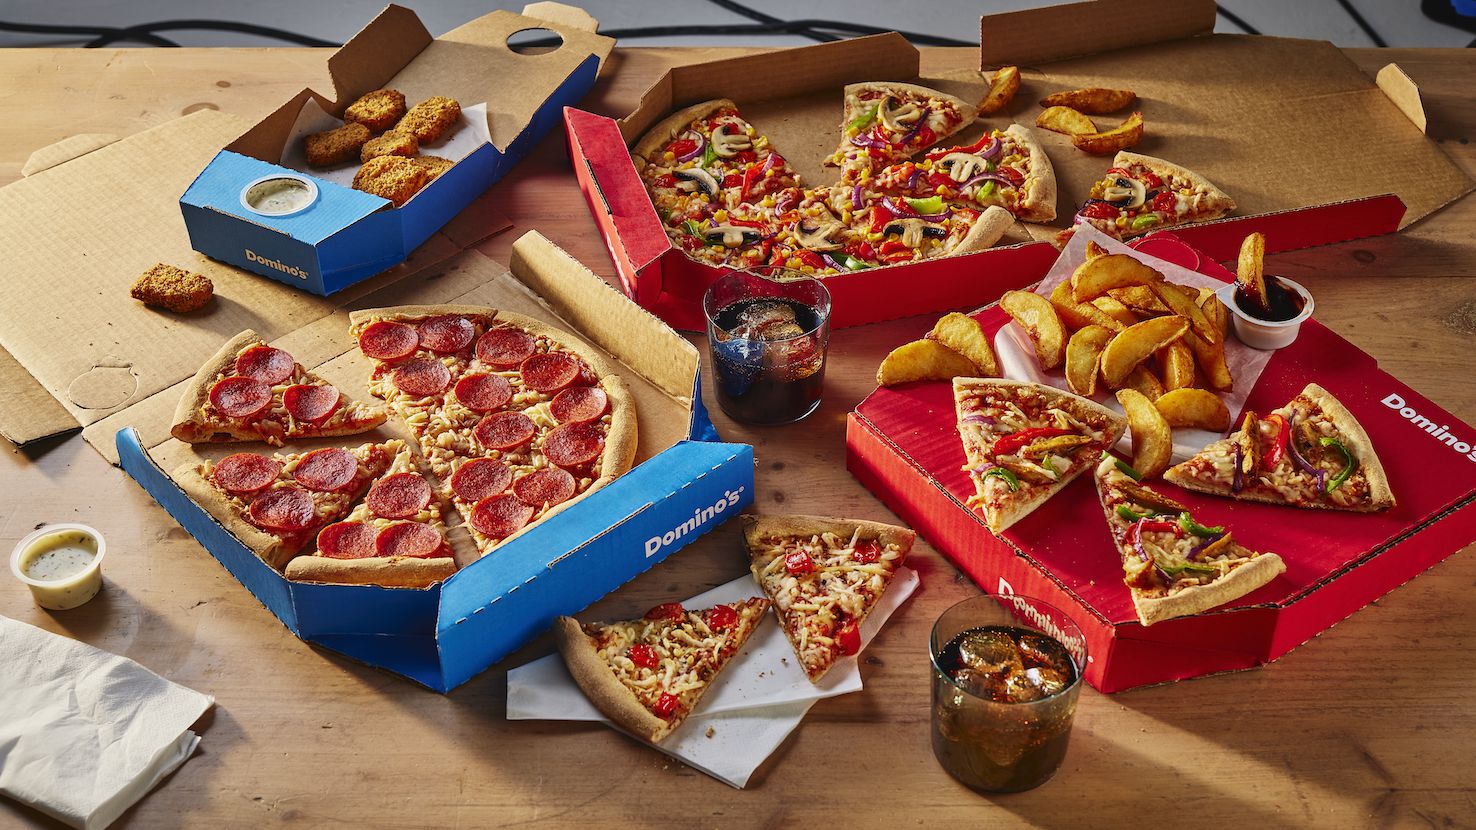 Images Domino's Pizza - Woking